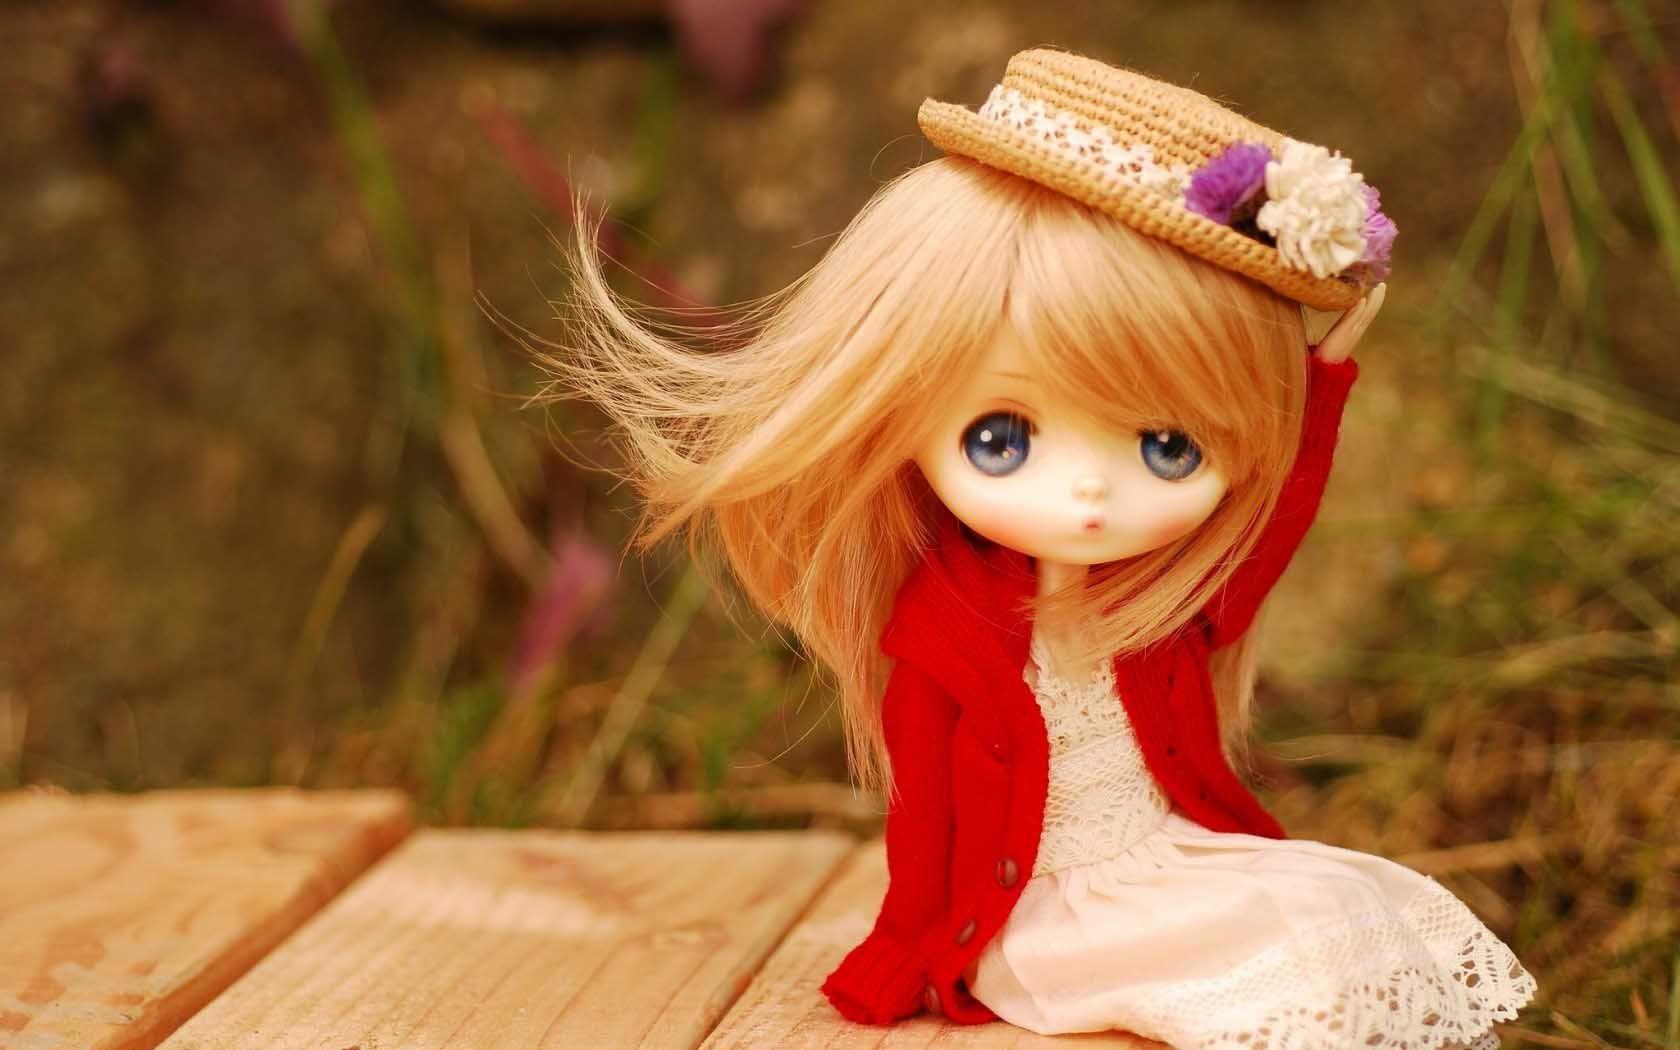 Cute Barbie Doll Wallpapers For Mobile - Wallpaper Cave